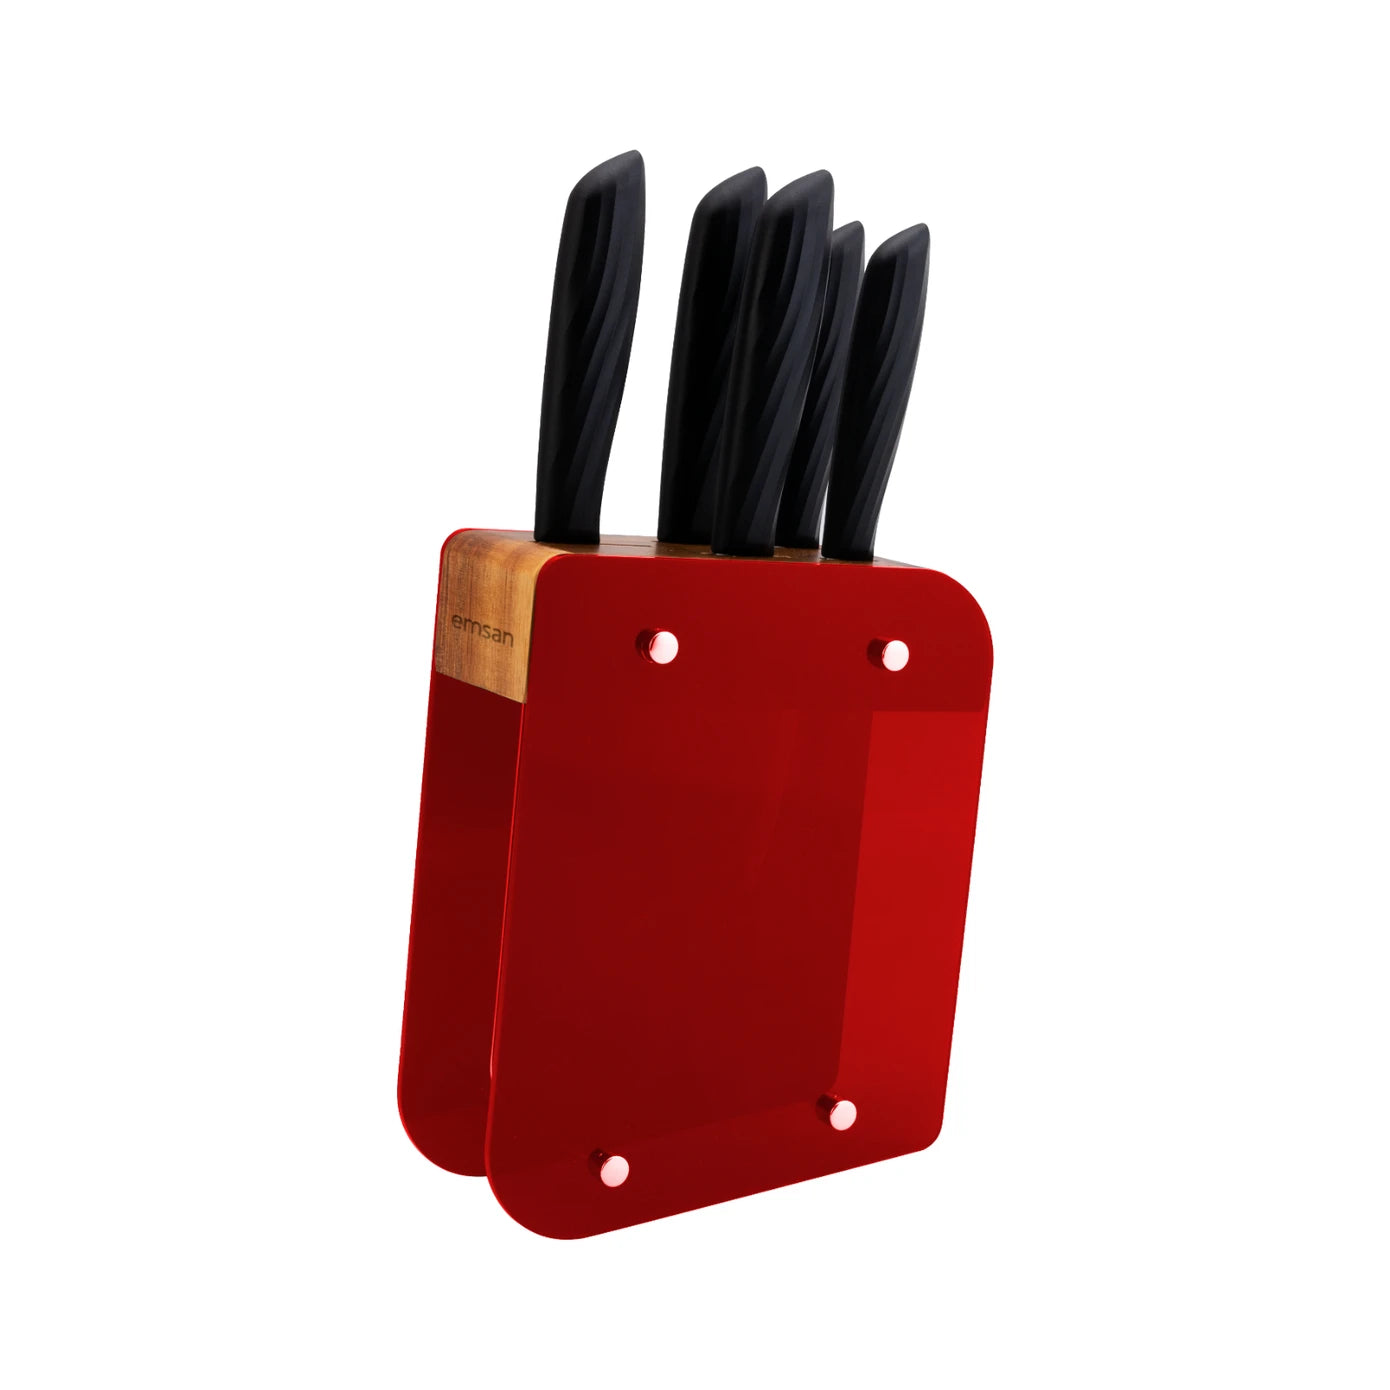 Premium quality knives for precise and effortless cutting. Enhance your culinary skills with this essential knife set.